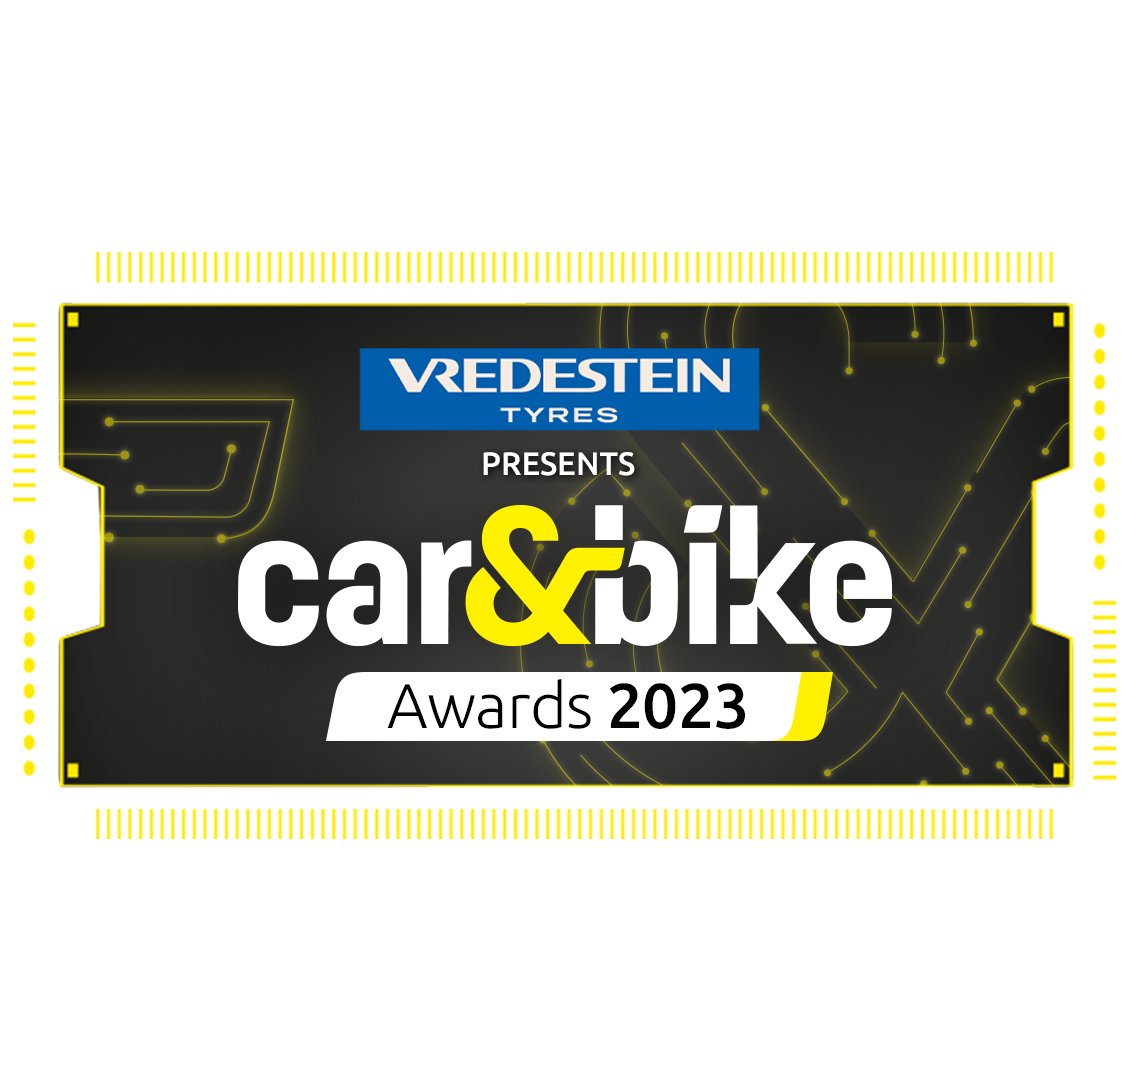 car&bike Awards 2023 are tomorrow! India's most credible awards are back for their 18th edition and we can't wait to show you all what's in store!

Presented by @VredesteinIndia, this one is truly #ReadyForNext! Stay tuned for updates.

#cnbawards2023